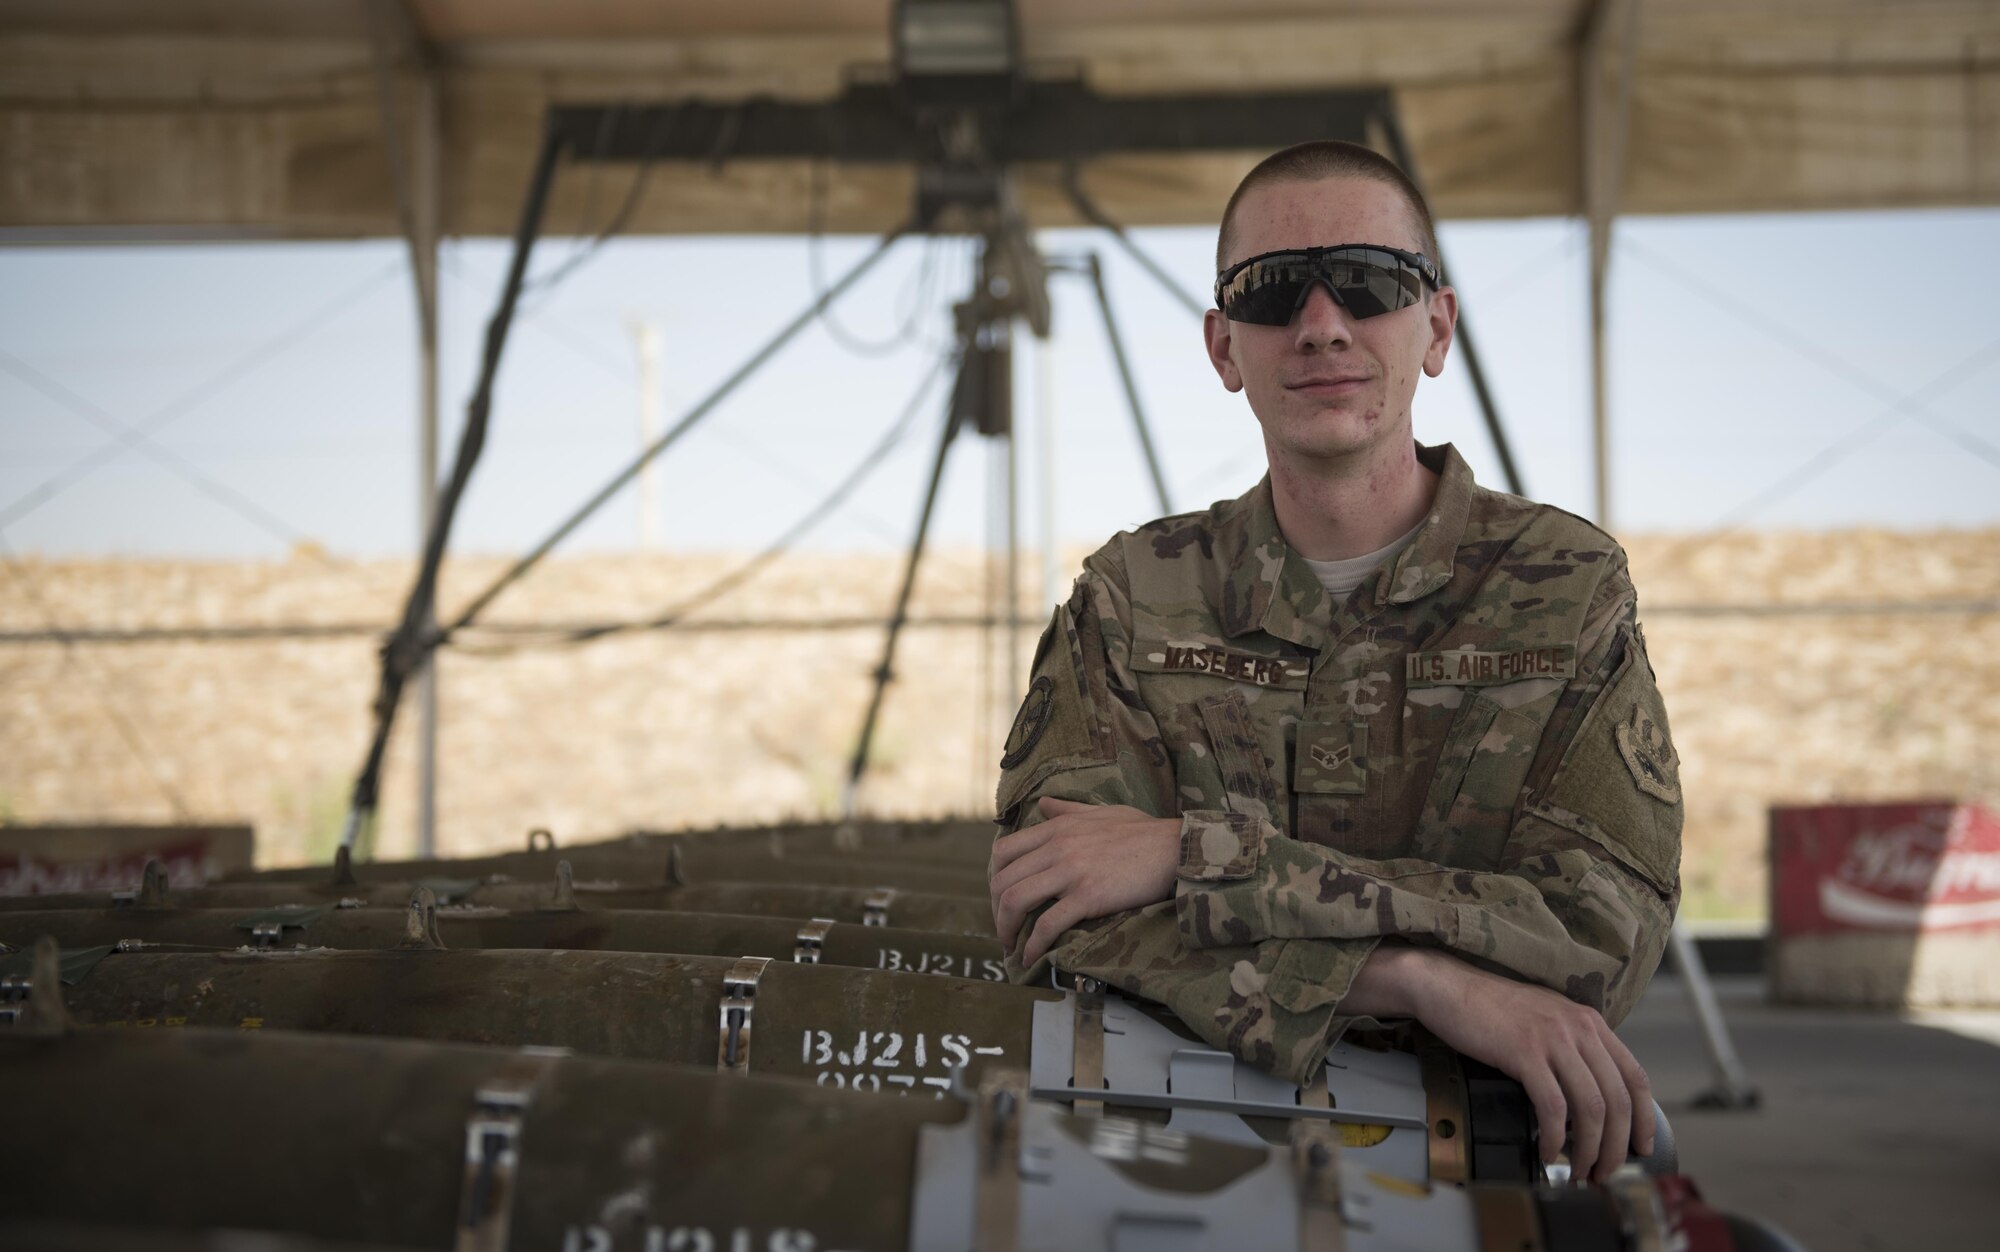 Airman 1st Class Shawn Maseberg is a munitions systems specialist assigned to the 455th Expeditionary Maintenance Squadron, Bagram Airfield, Afghanistan.